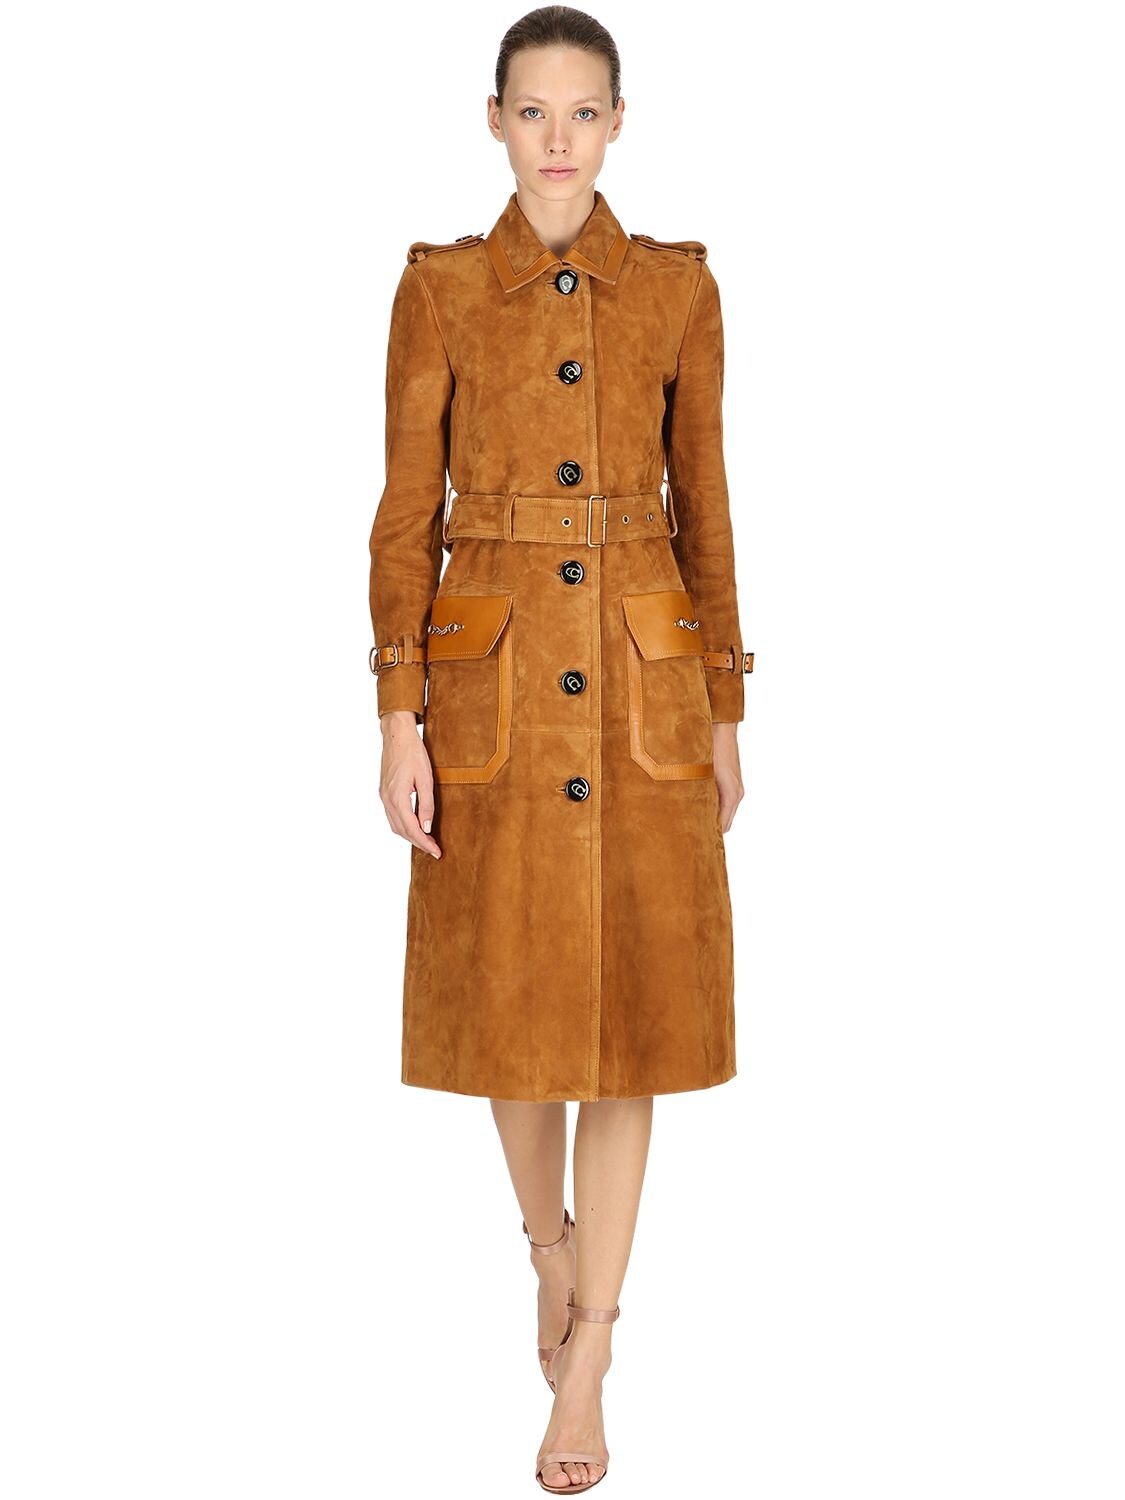 COACH SUEDE TRENCH COAT,68I5KW013-Q0FN0